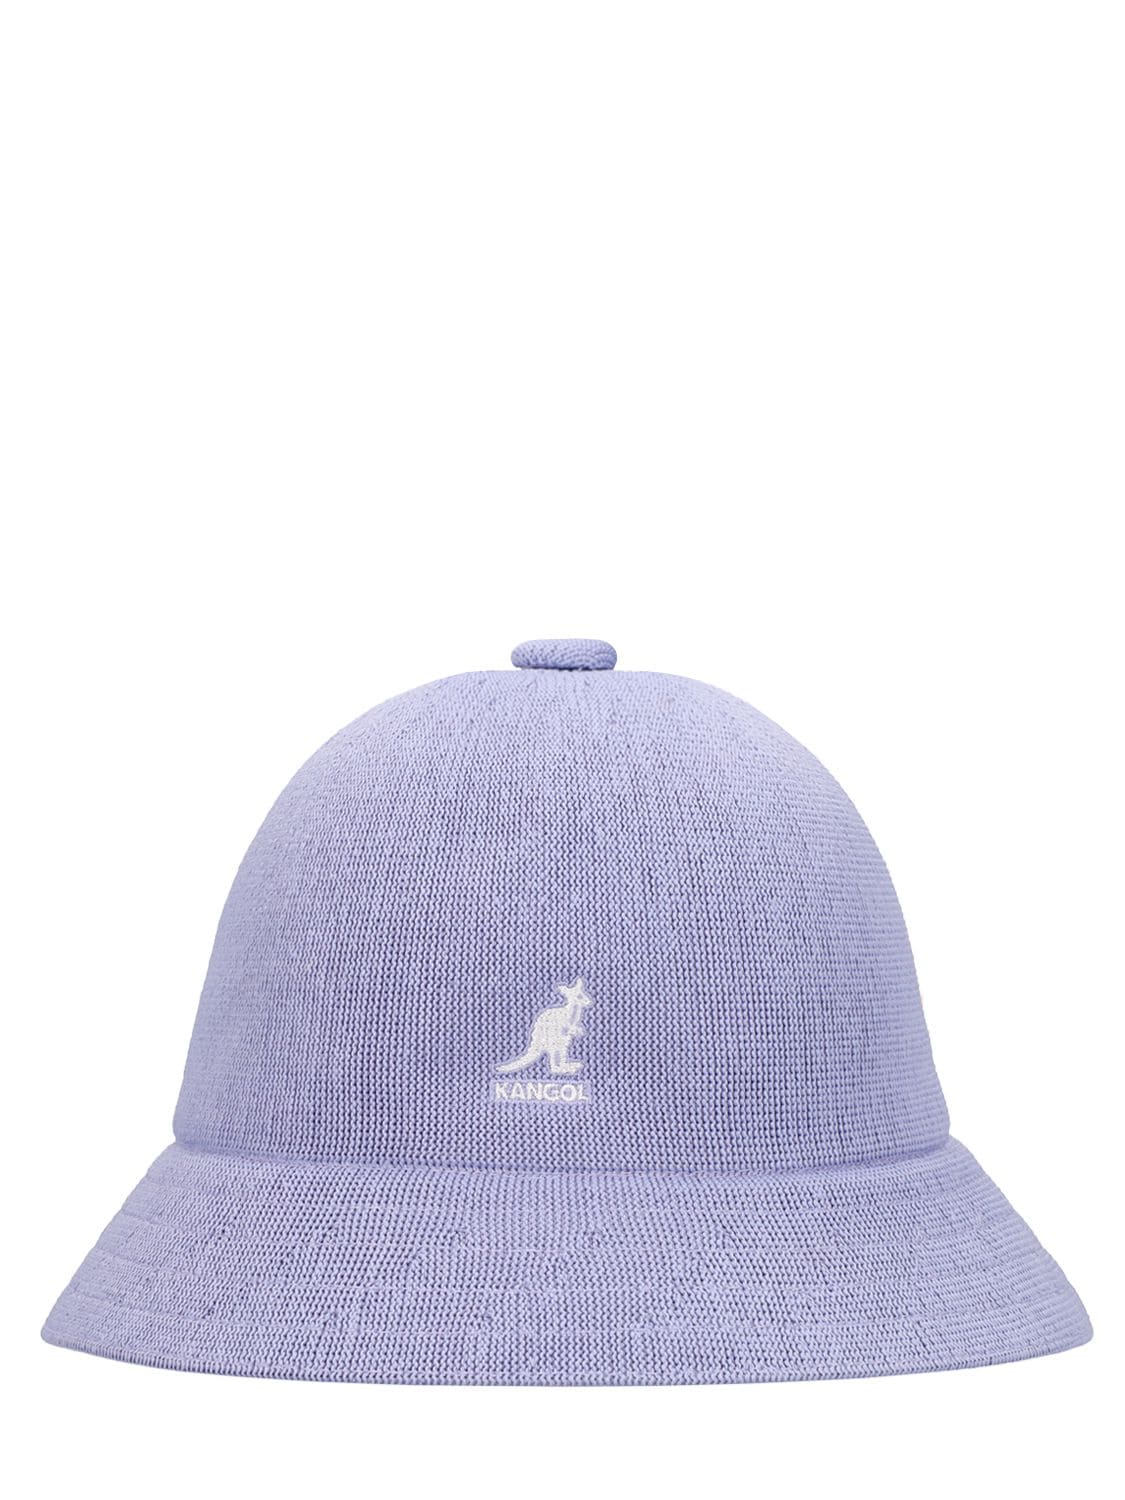 Kangol Tropic Casual Bucket Hat In Lilac